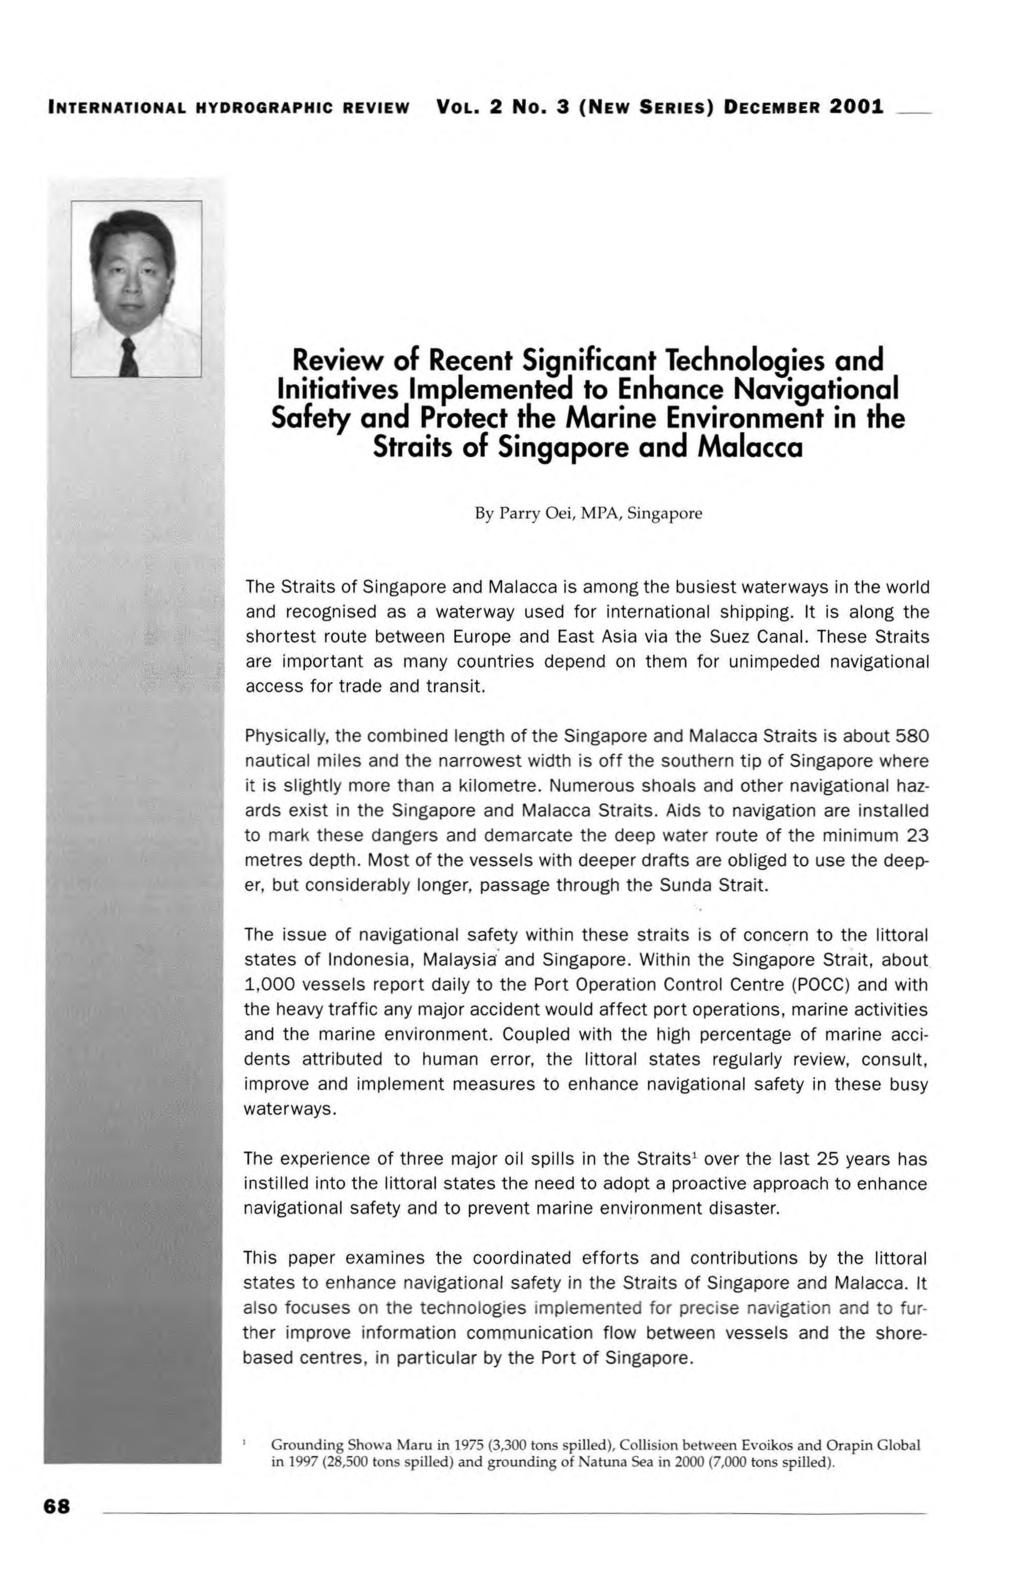 Review of Recent Significant Technologies and Initiatives Implemented to Enhance Navigational Safety and Protect the Marine Environment in the Straits of Singapore and Malacca By Parry Oei, MPA,